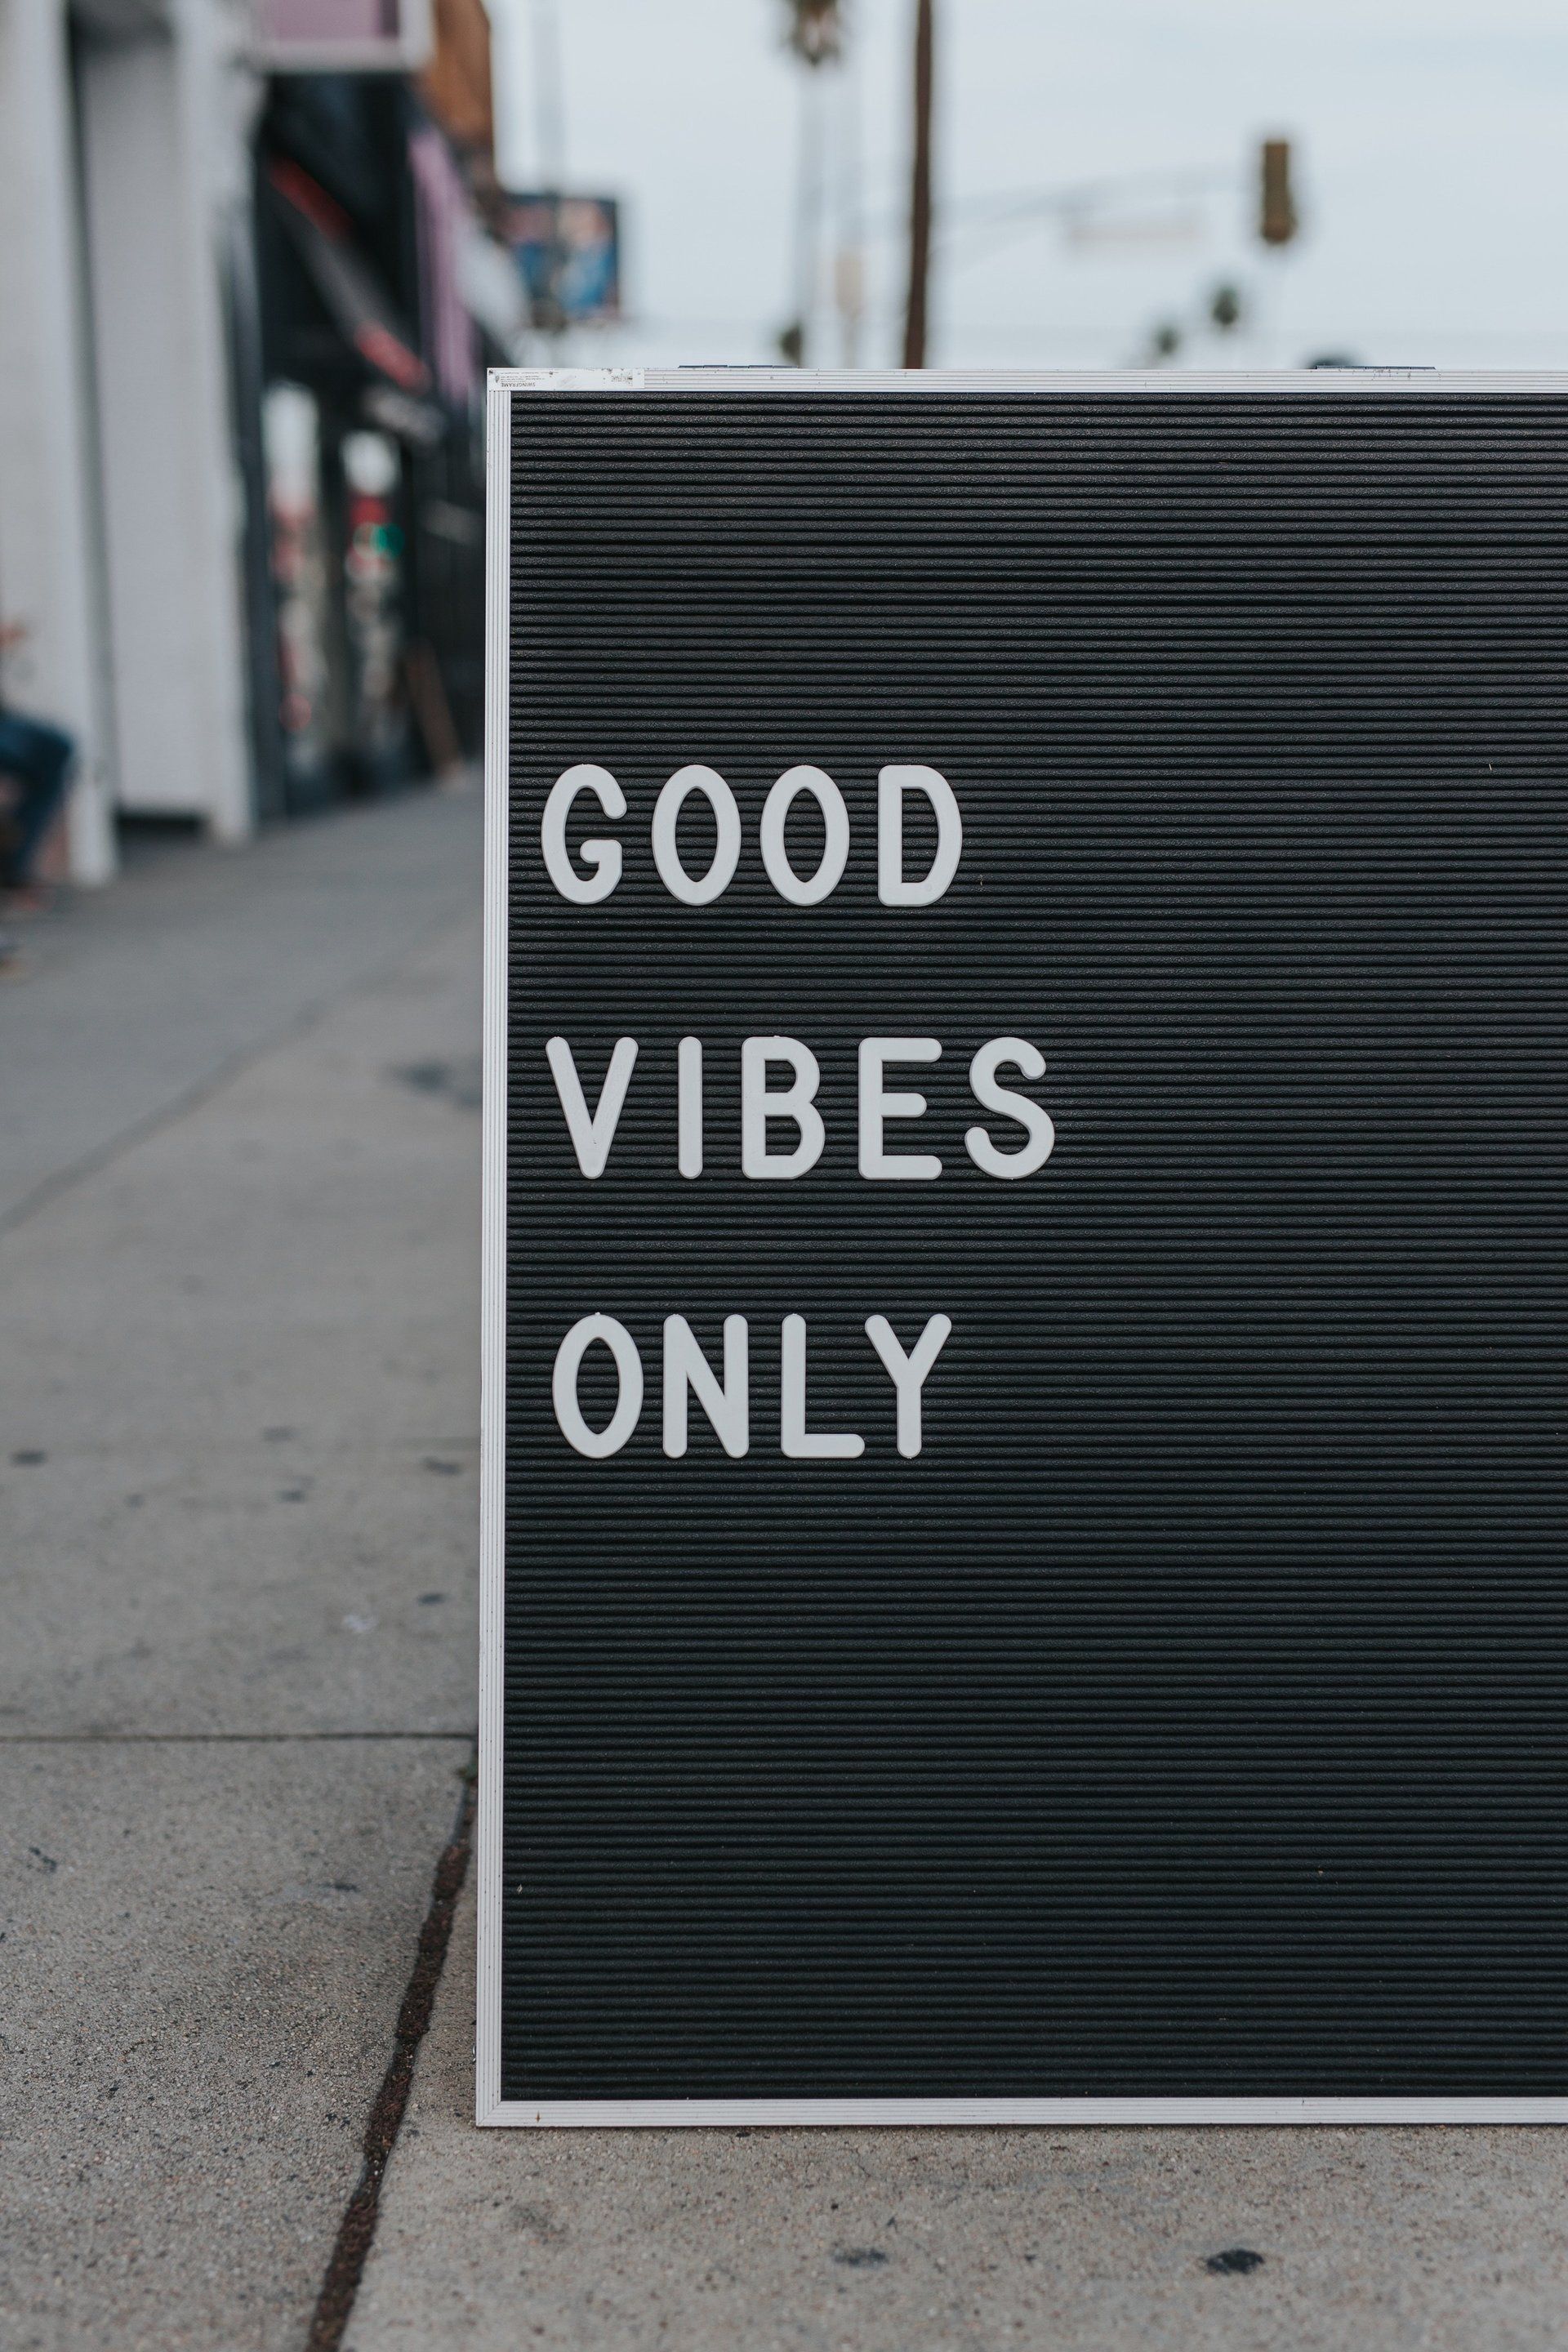 Good Vibes Only - a great sign along a sidewalk